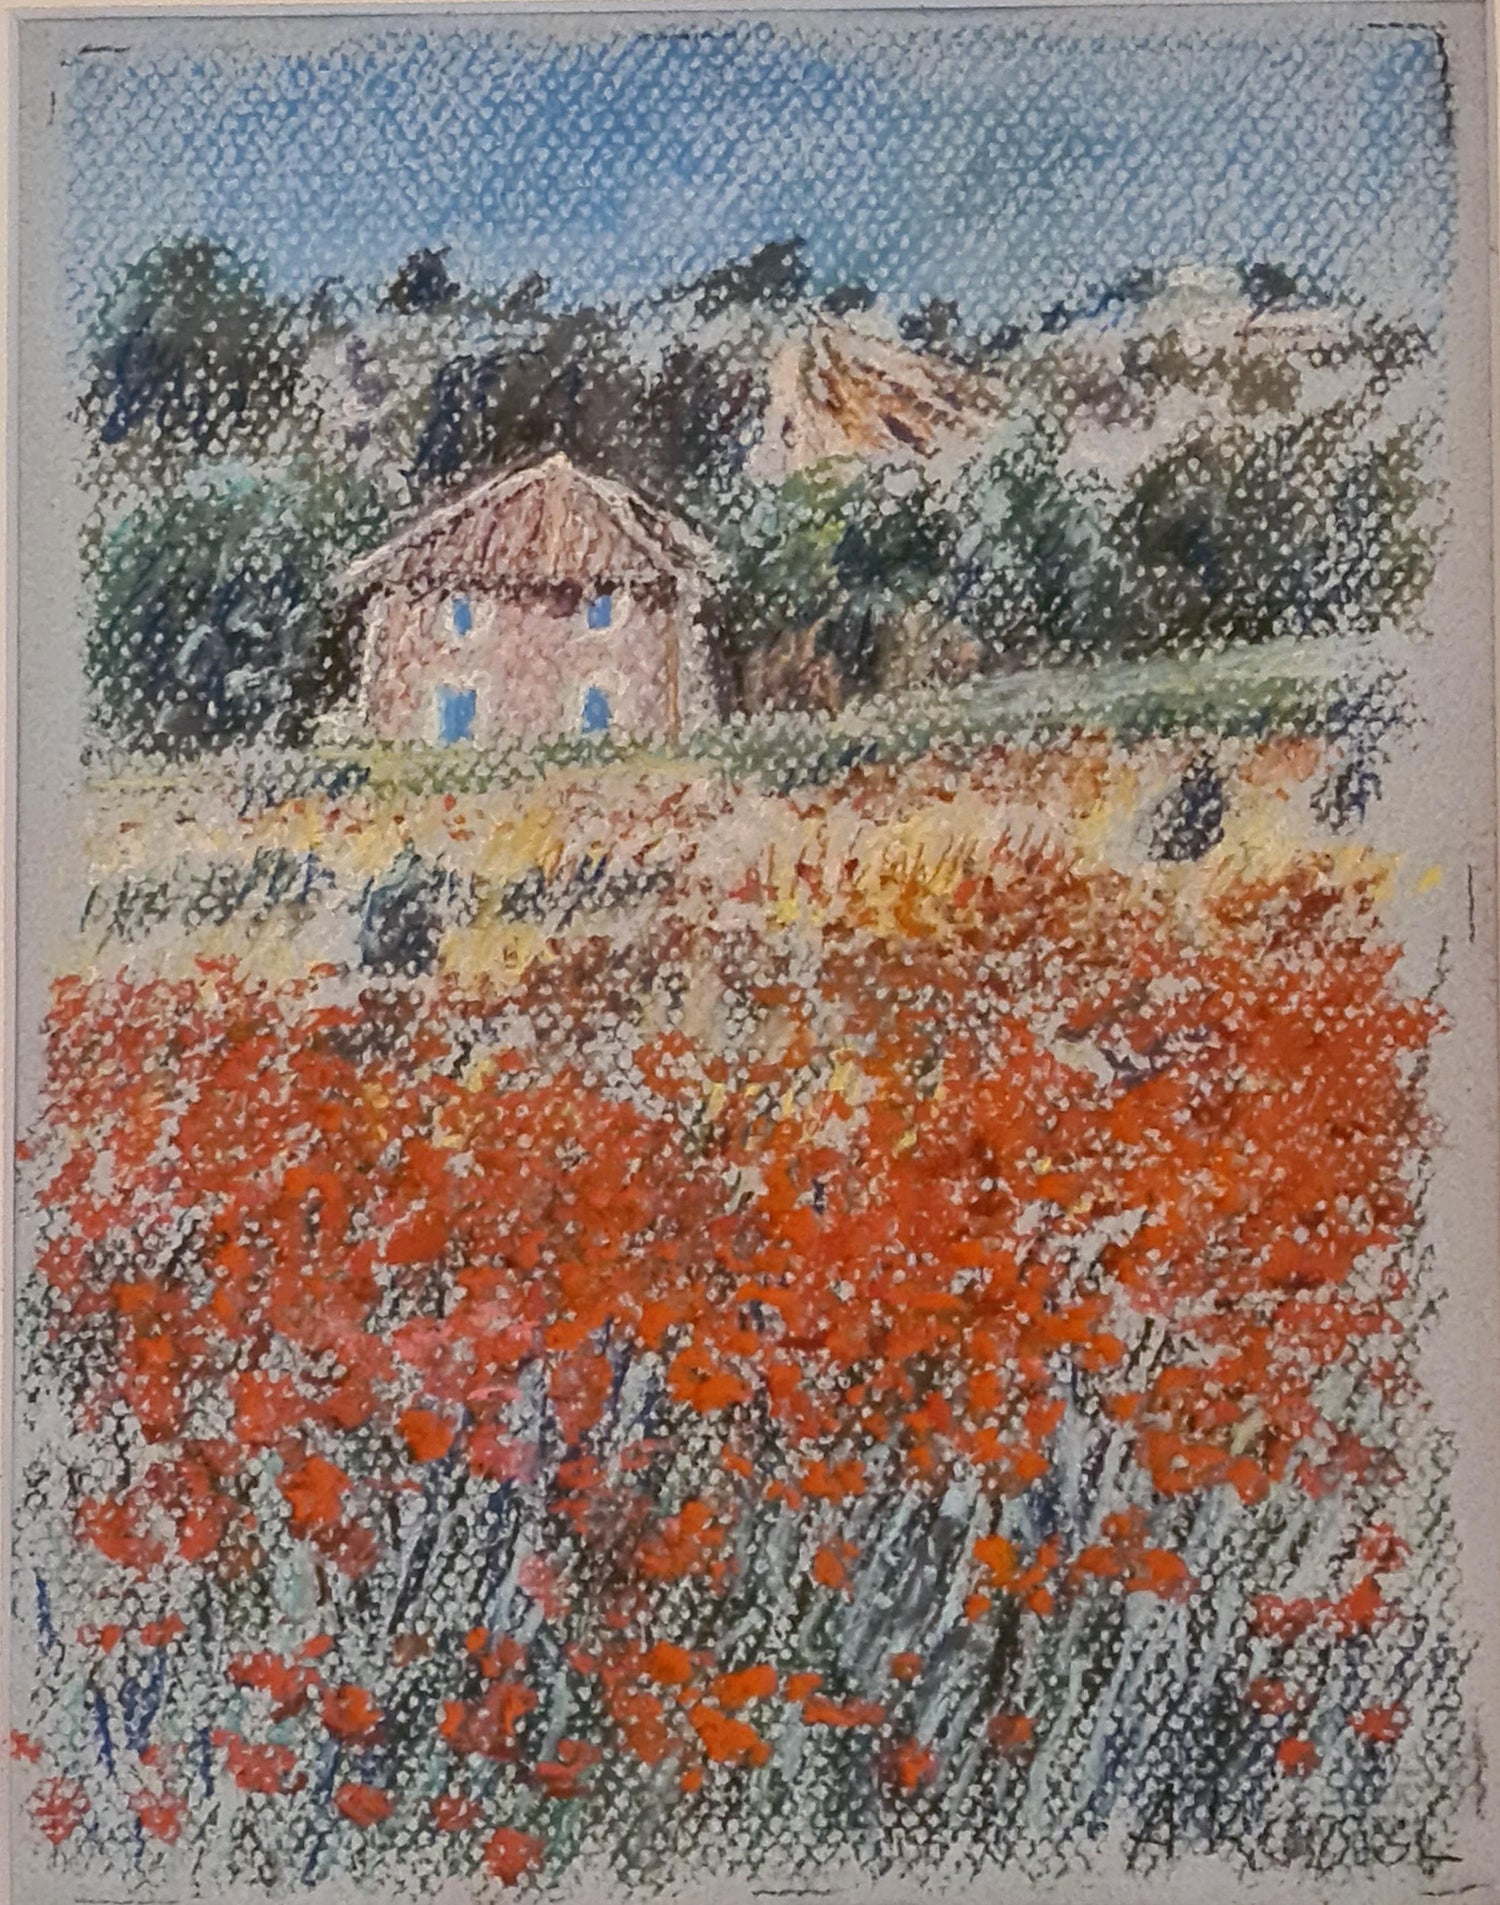 A Roussel - Les Coquelicots, Cottage in the Poppy Field For Sale at 1stDibs